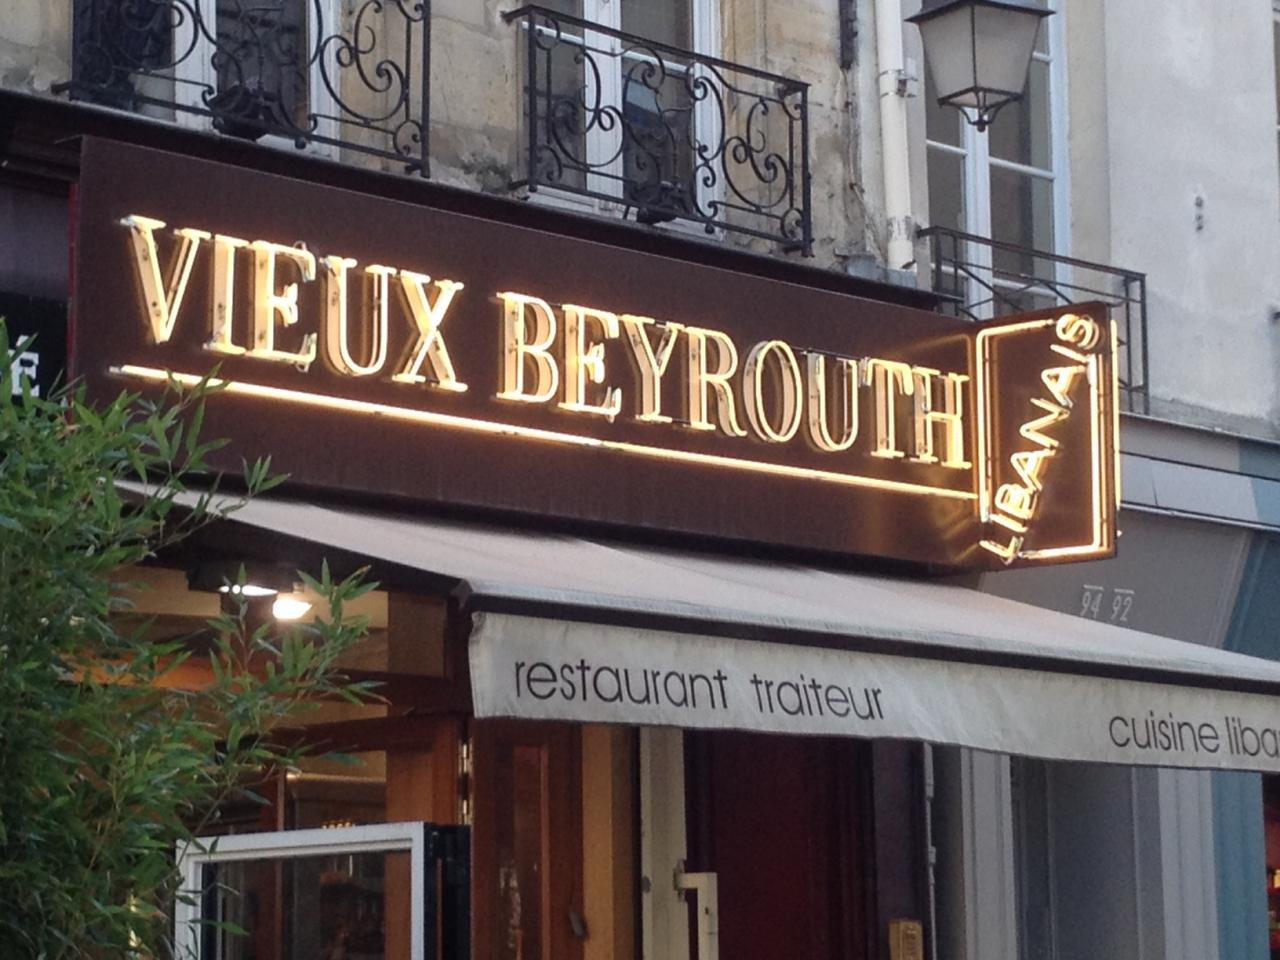 LE VIEUX BEYROUTH